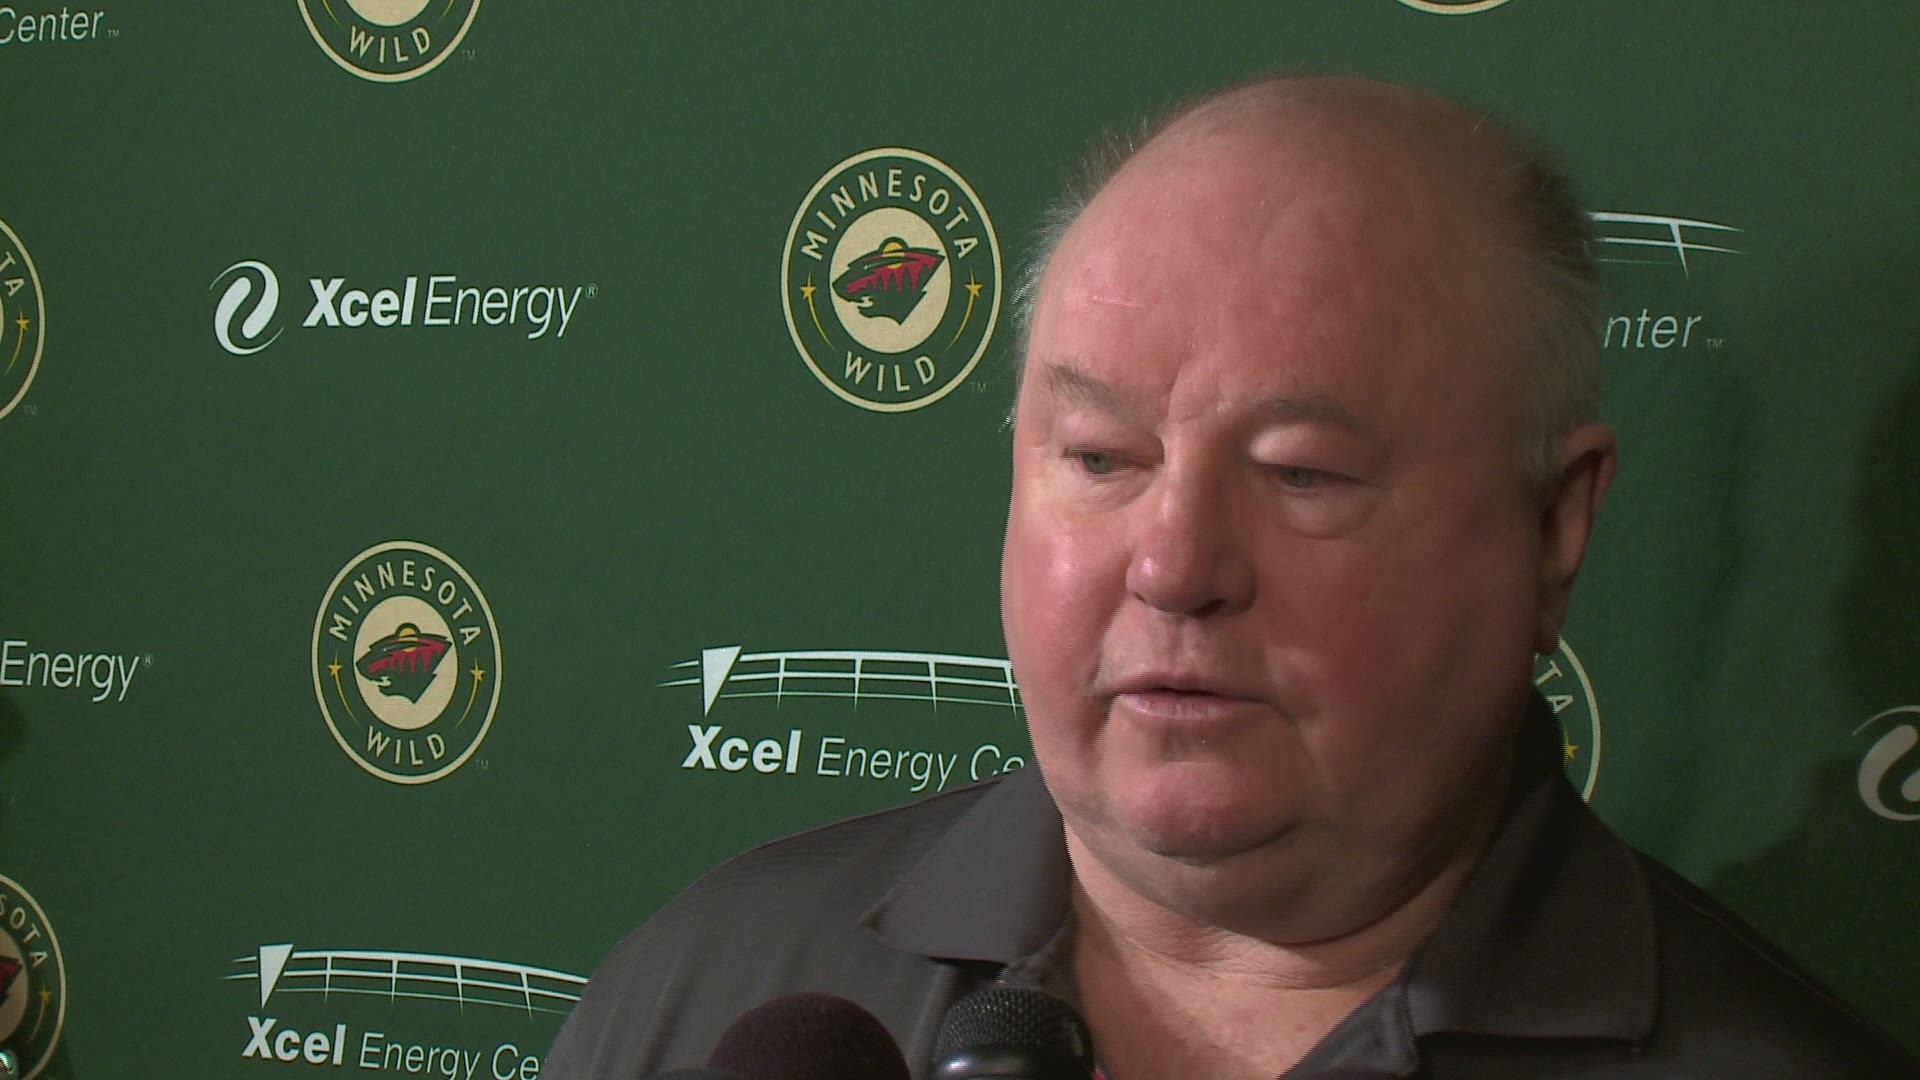 Hear what Wild players had to say about losing their captain for the remainder of the season.